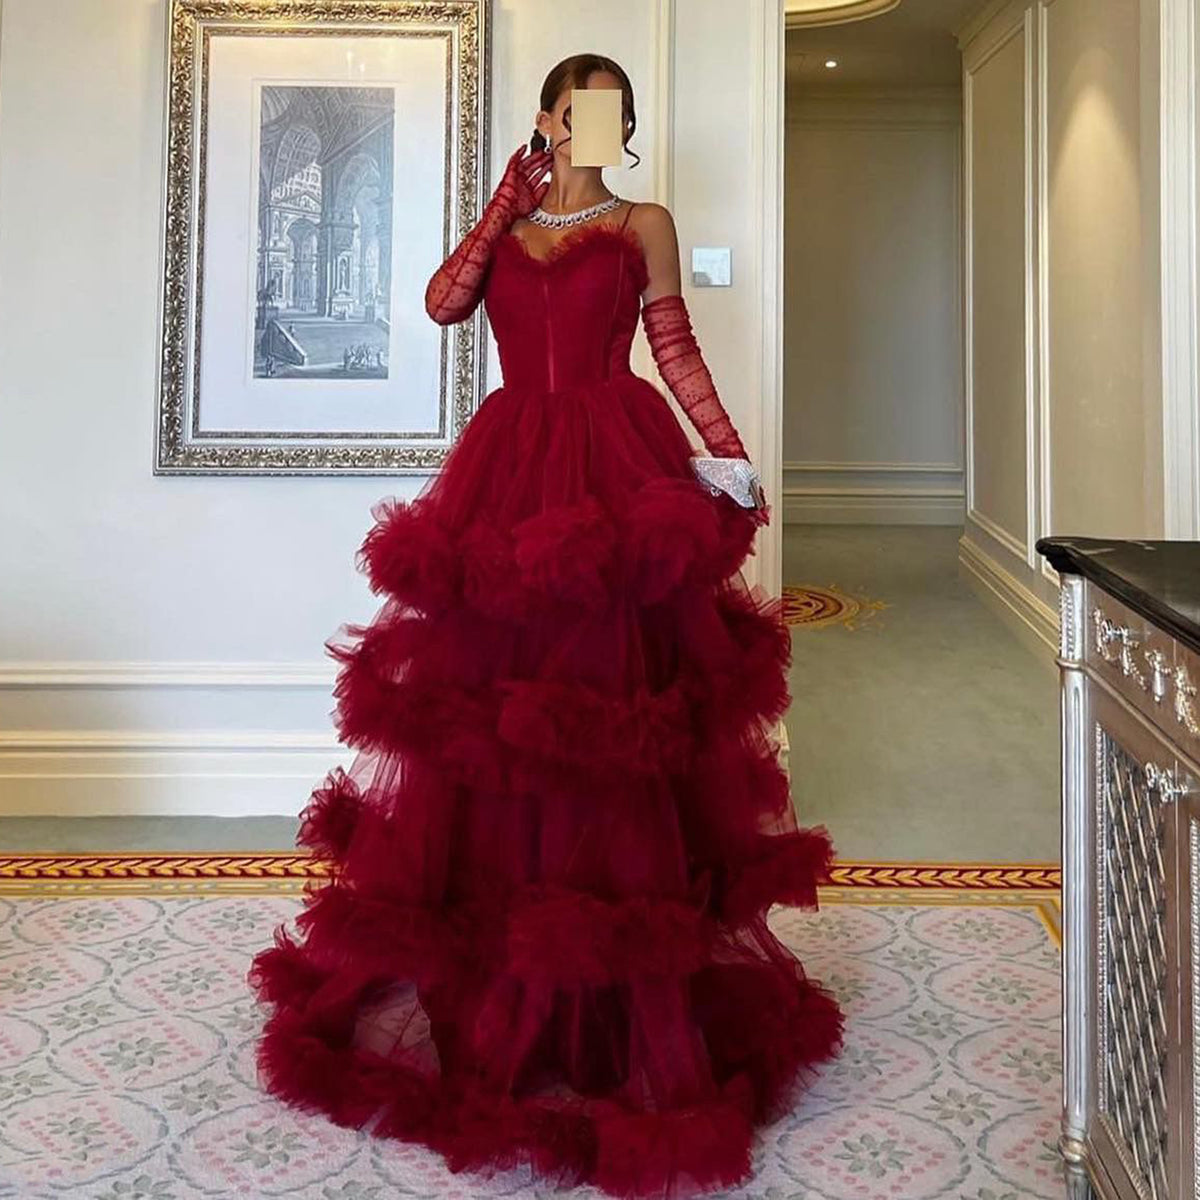 Sharon Said Arabic Burgundy Tulle Tiered Ruffles Evening Dresses with Gloves Pink Spaghetti Straps Women Wedding Party Gowns SF049